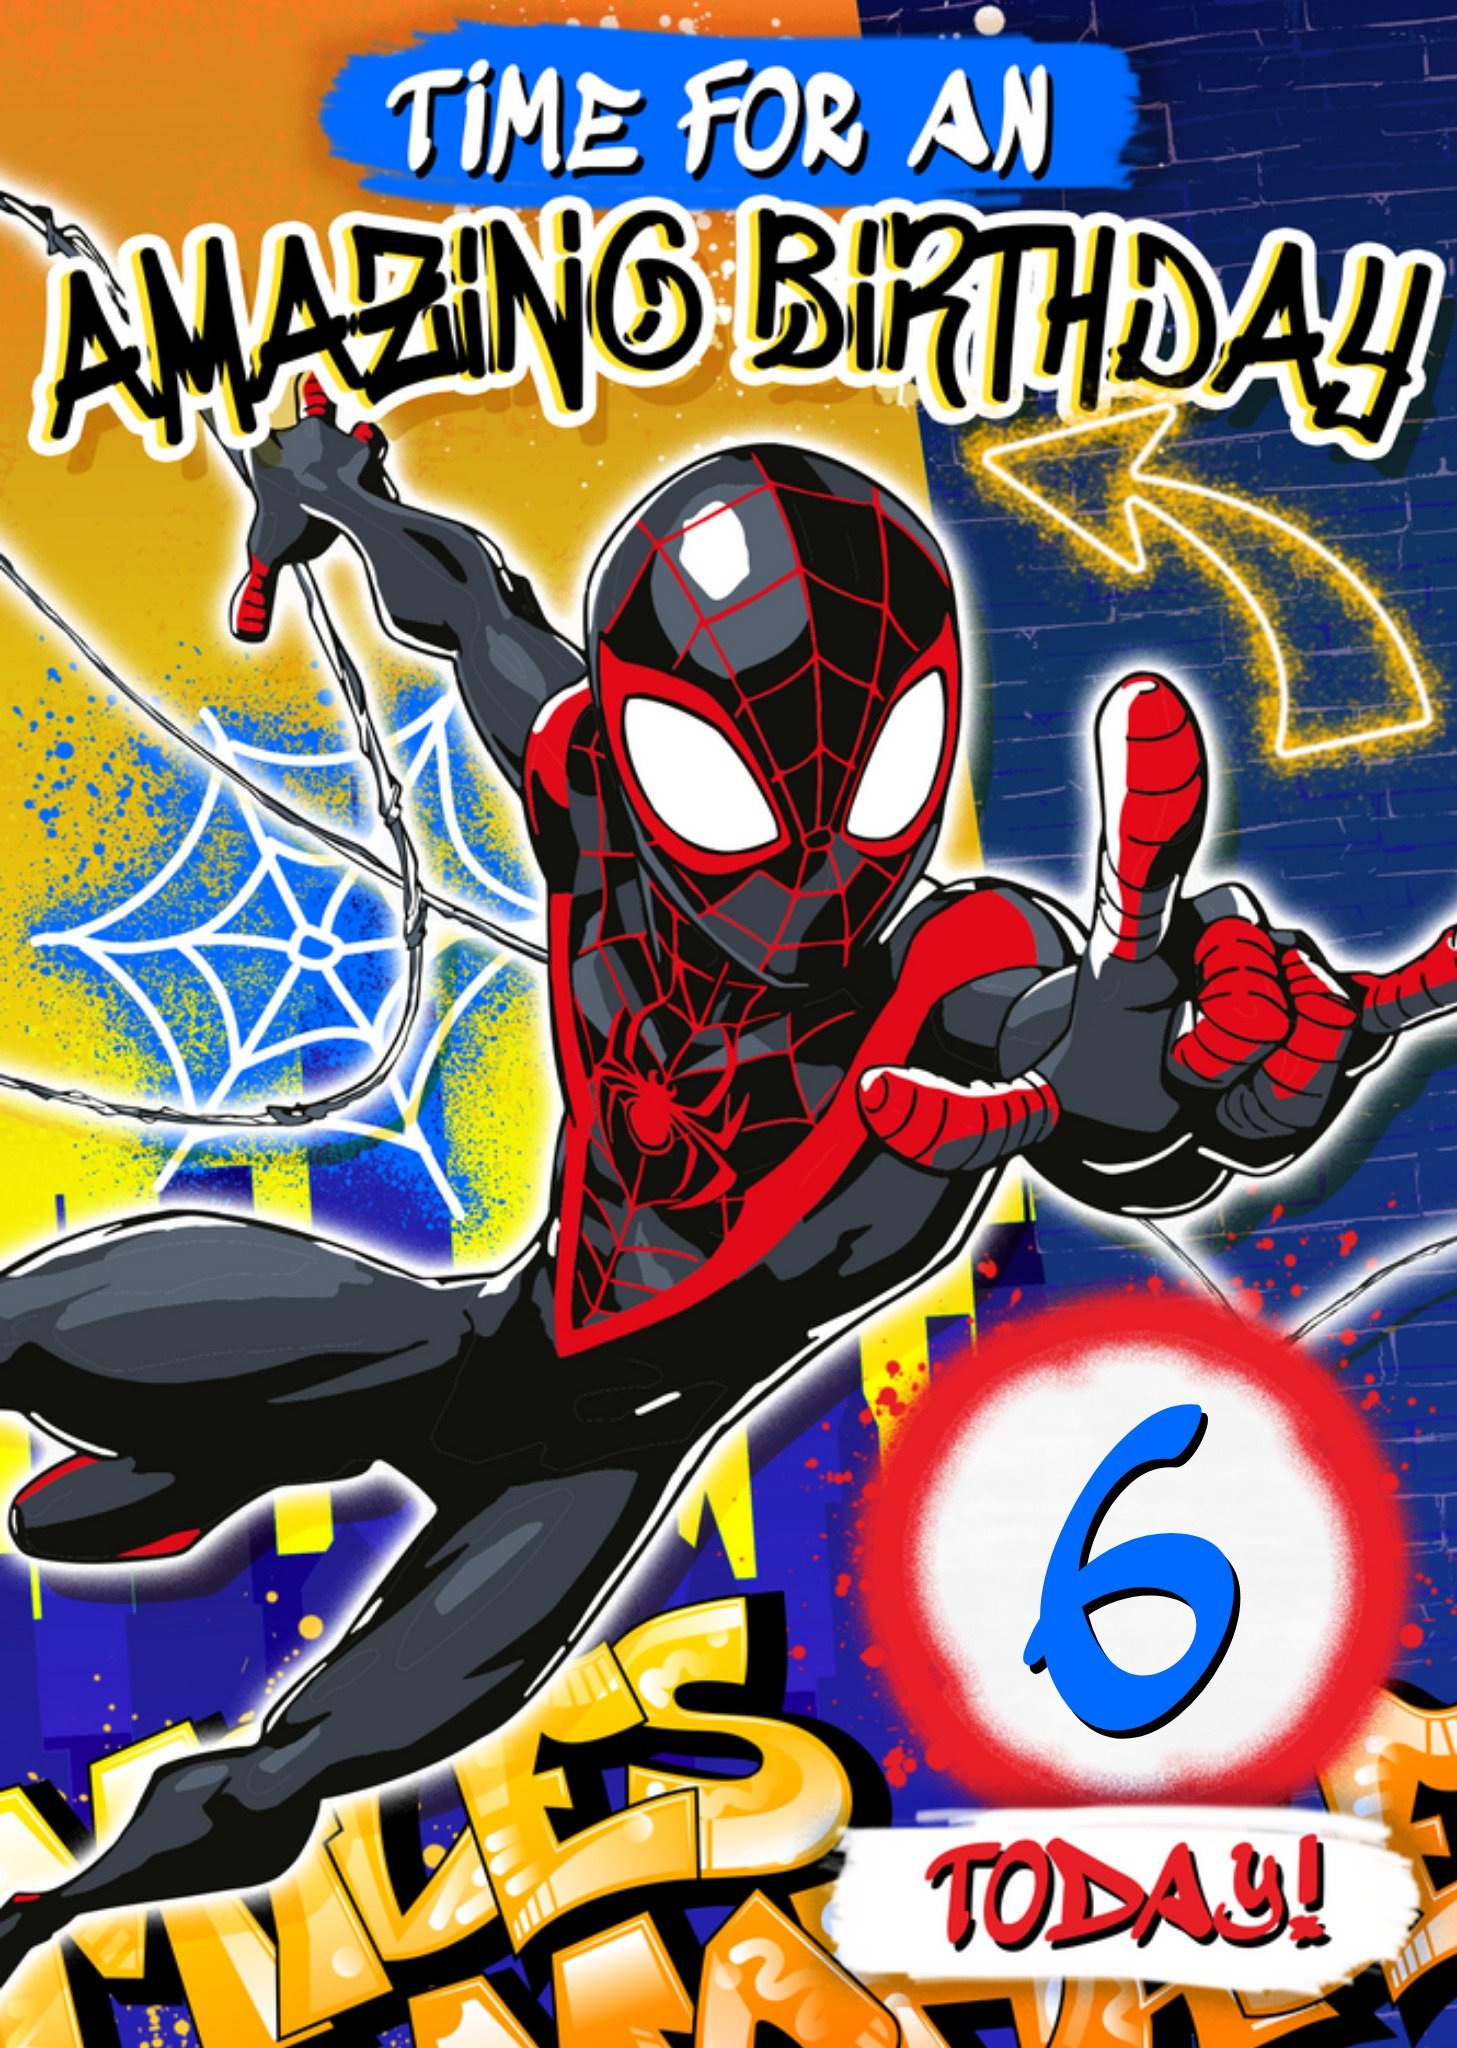 Marvel Spiderman Mile Morales Time For An Amazing Birthday 6 Today Birthday Card, Large